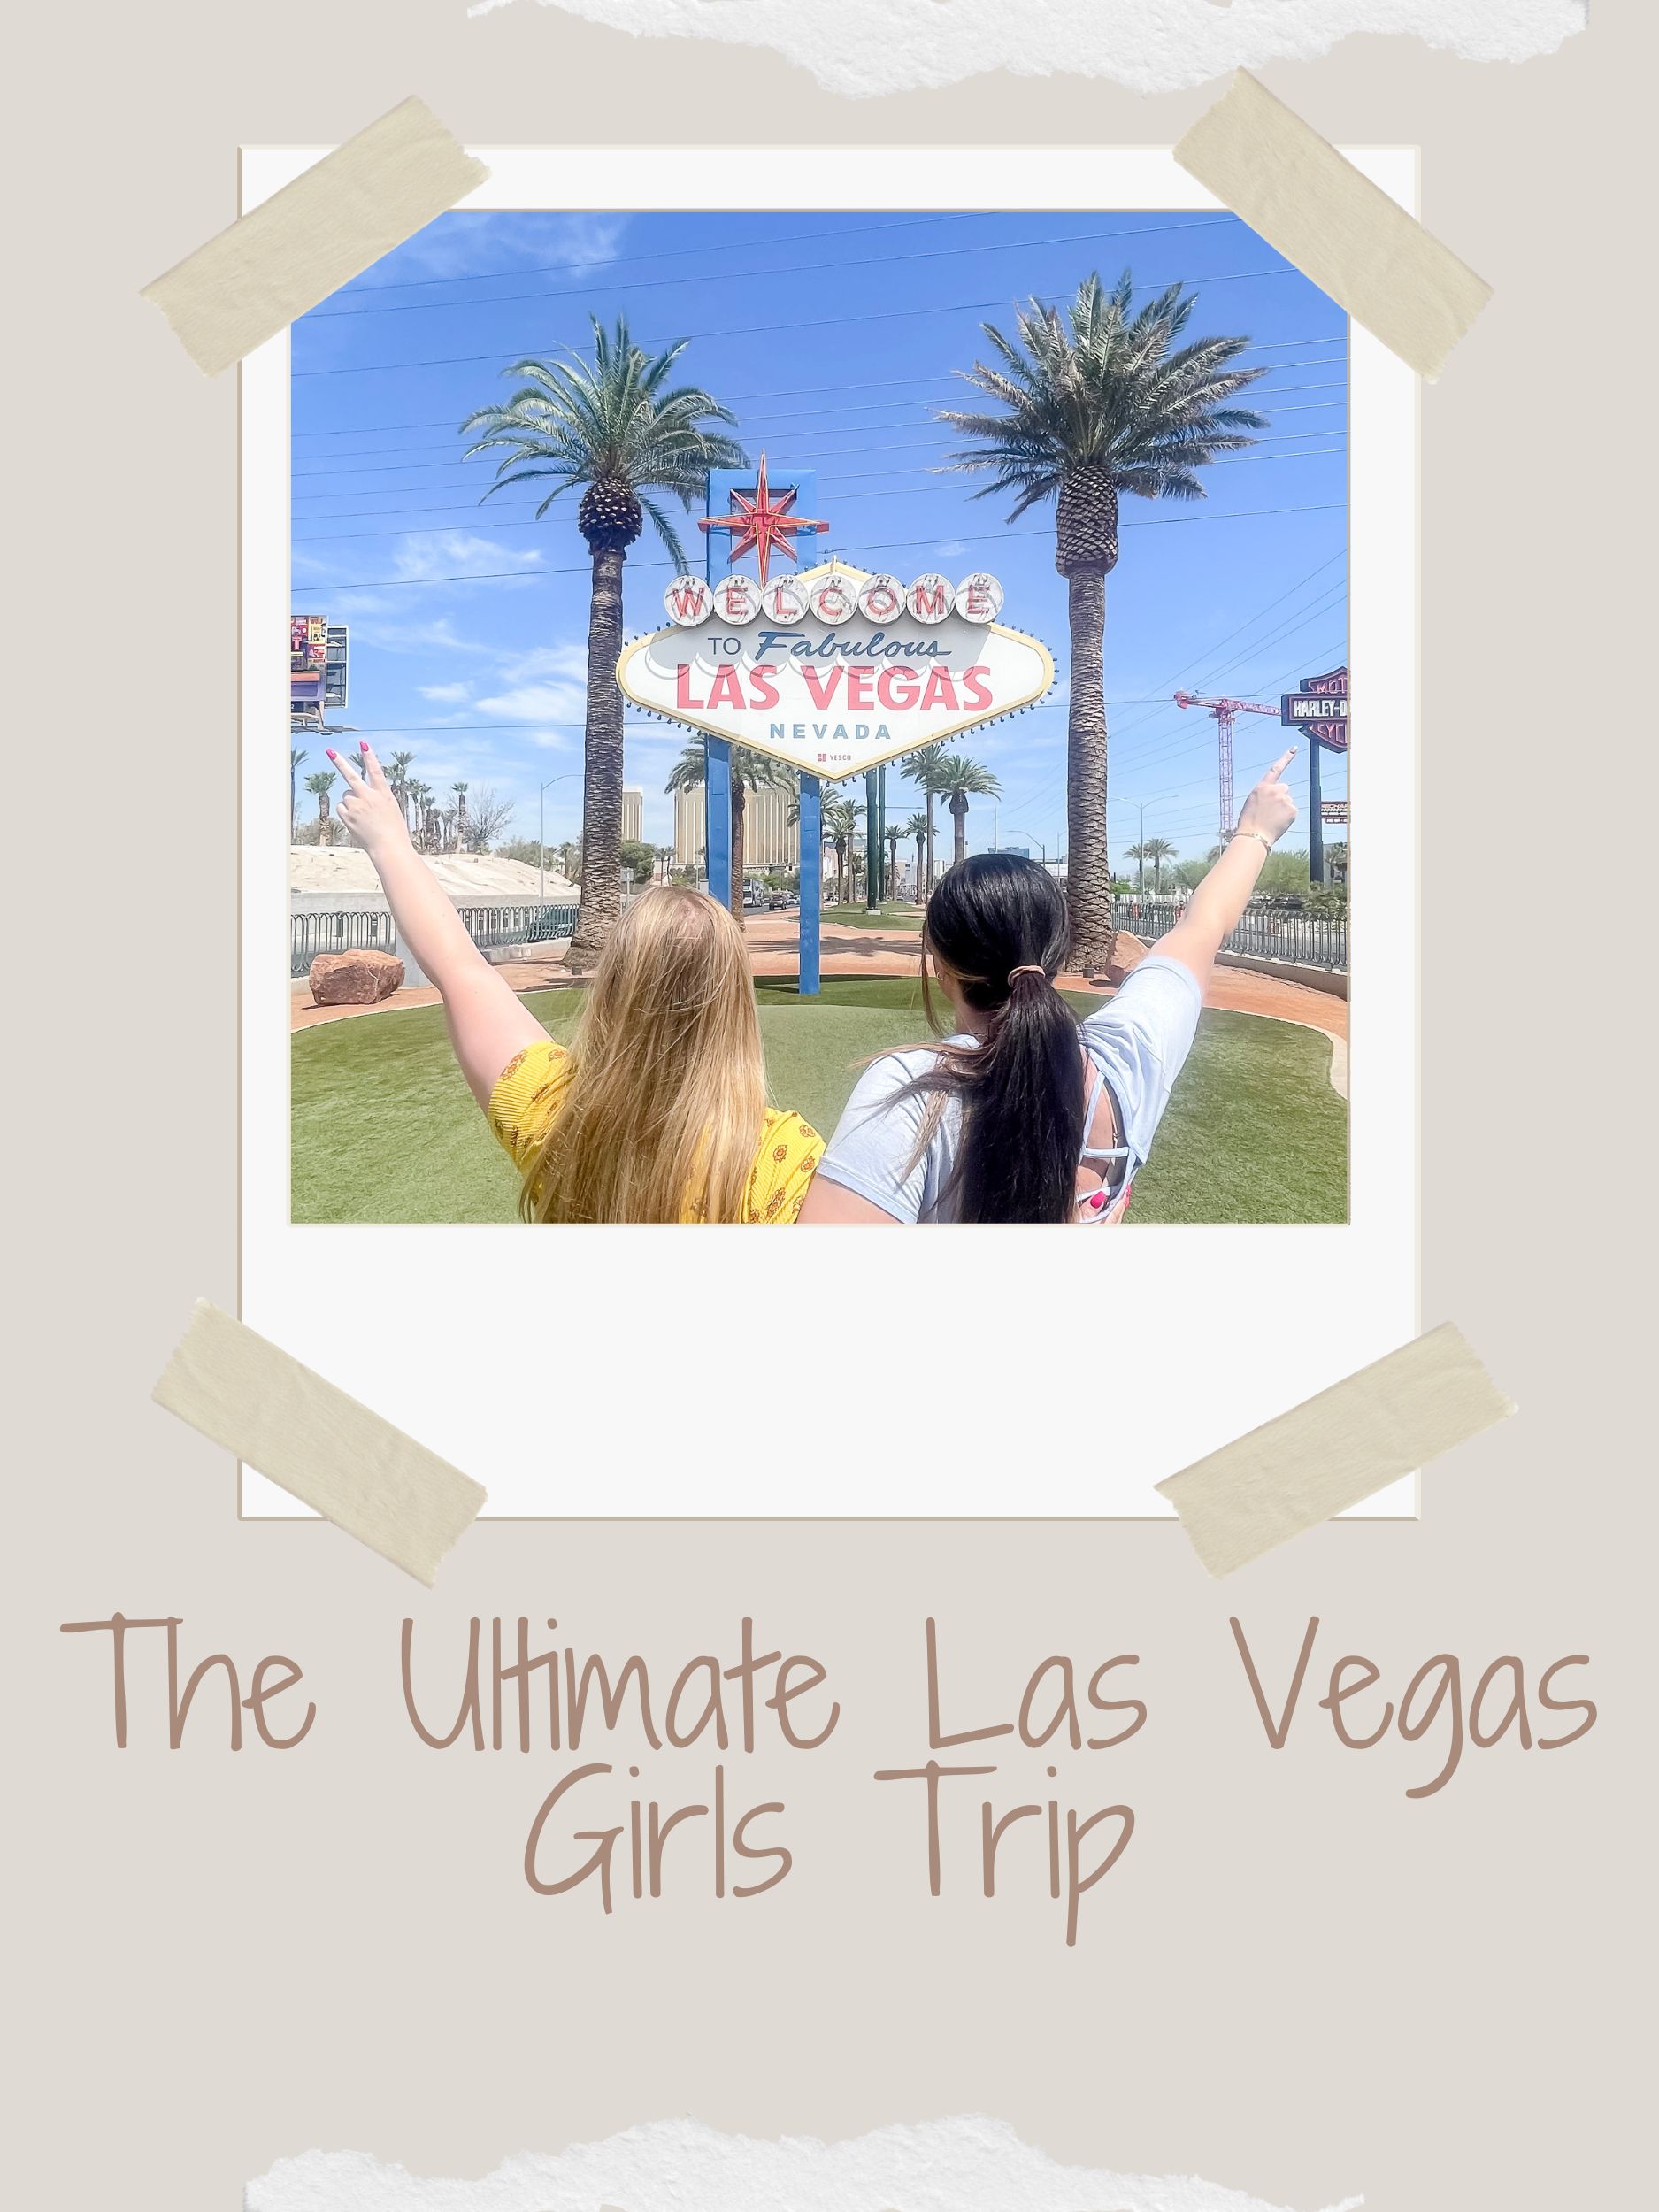 The Ultimate Las Vegas Girls Trip: 25 Things to Do with Your Best Friends in 2023